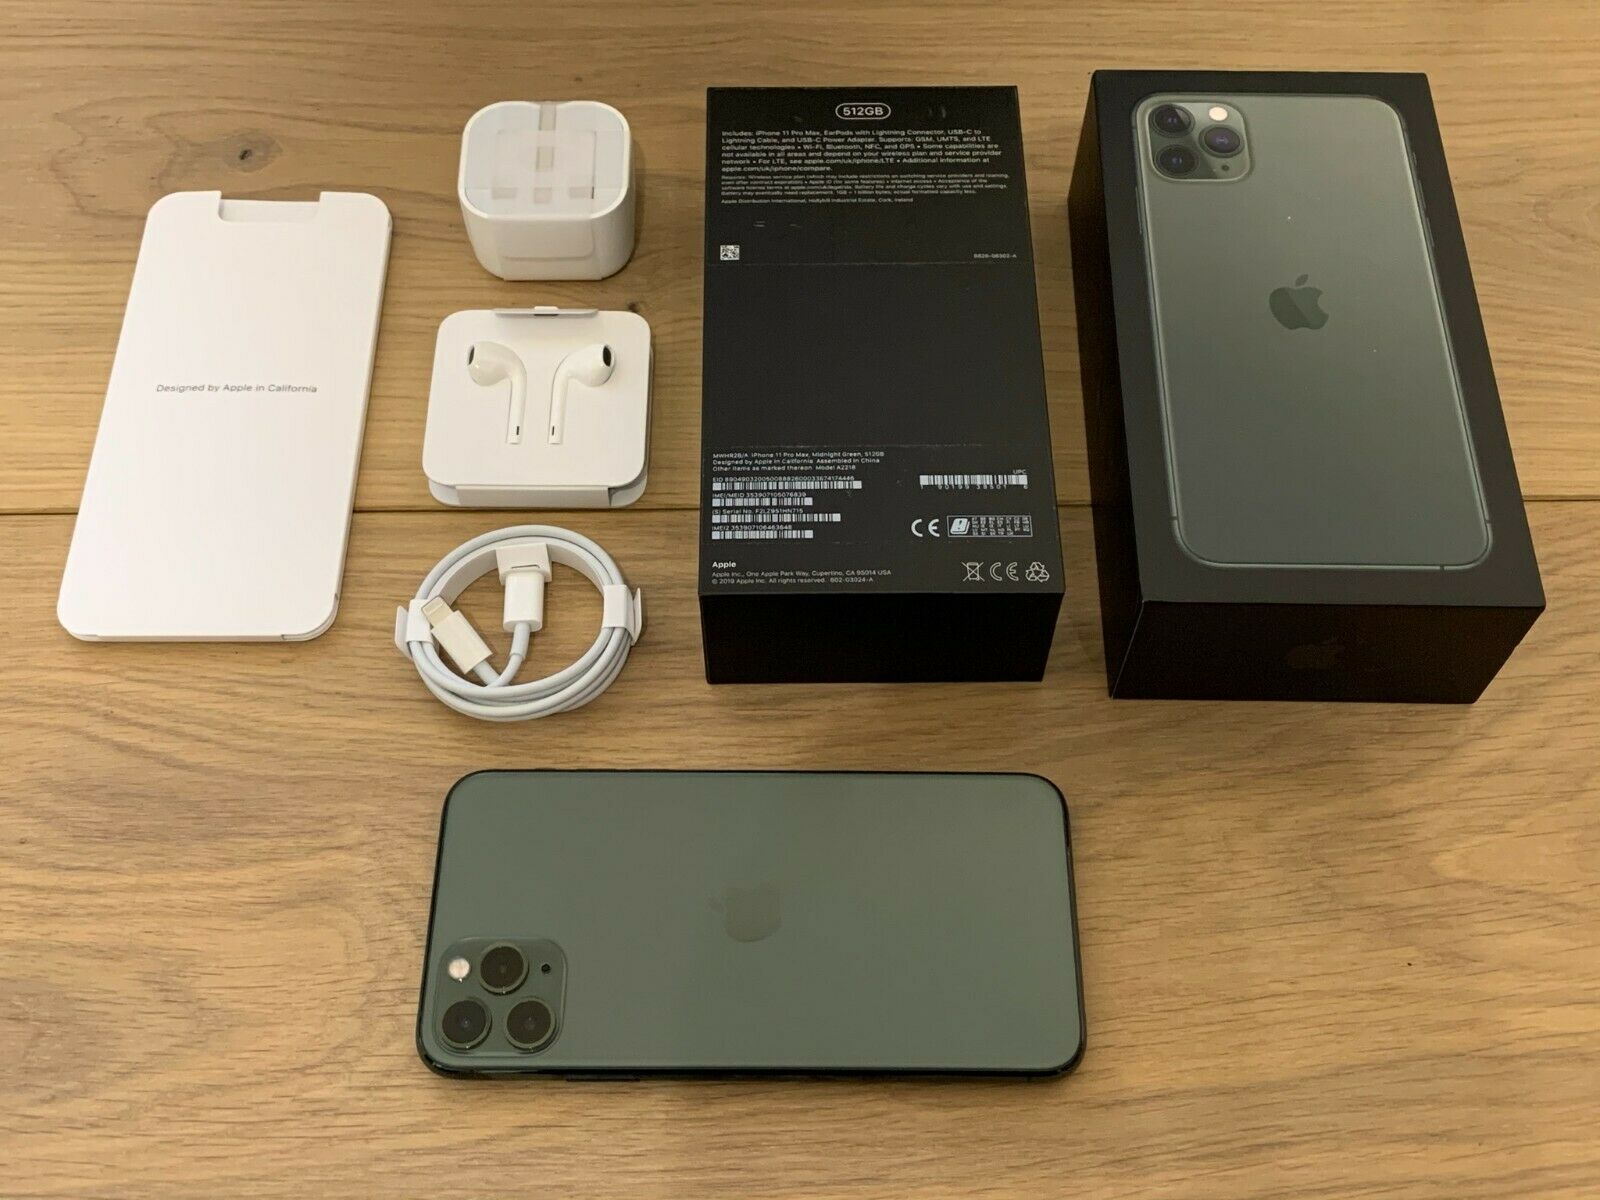 Apple iphone 11 pro-max 512gb gold........contact for price